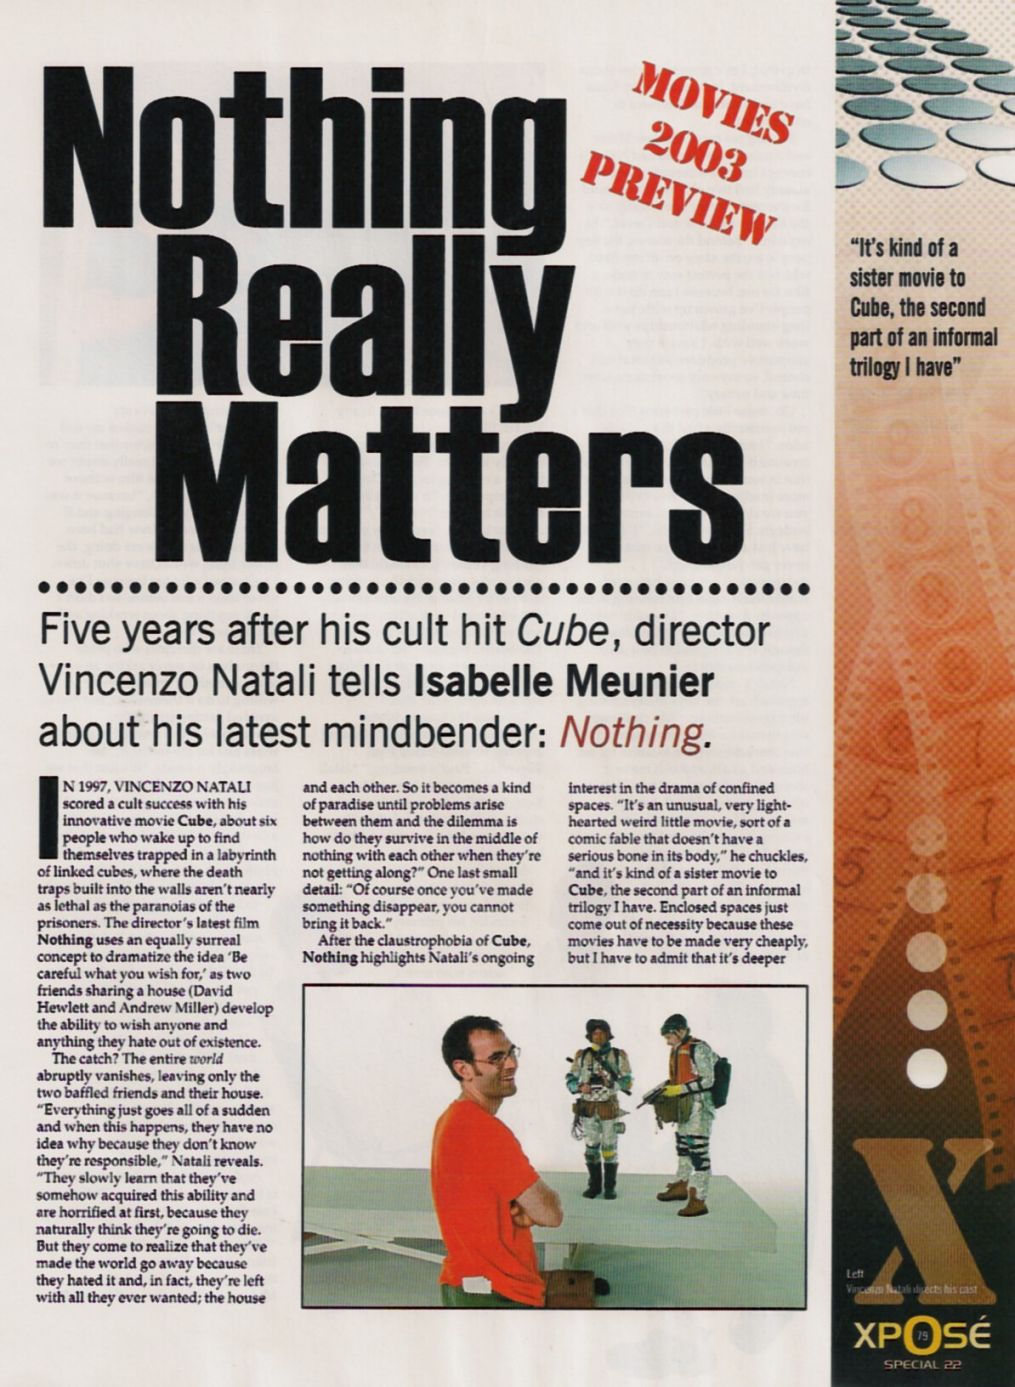 Xpose Special #22 - 2003 - Nothing Really Matters - Page 2
Keywords: nothing_media